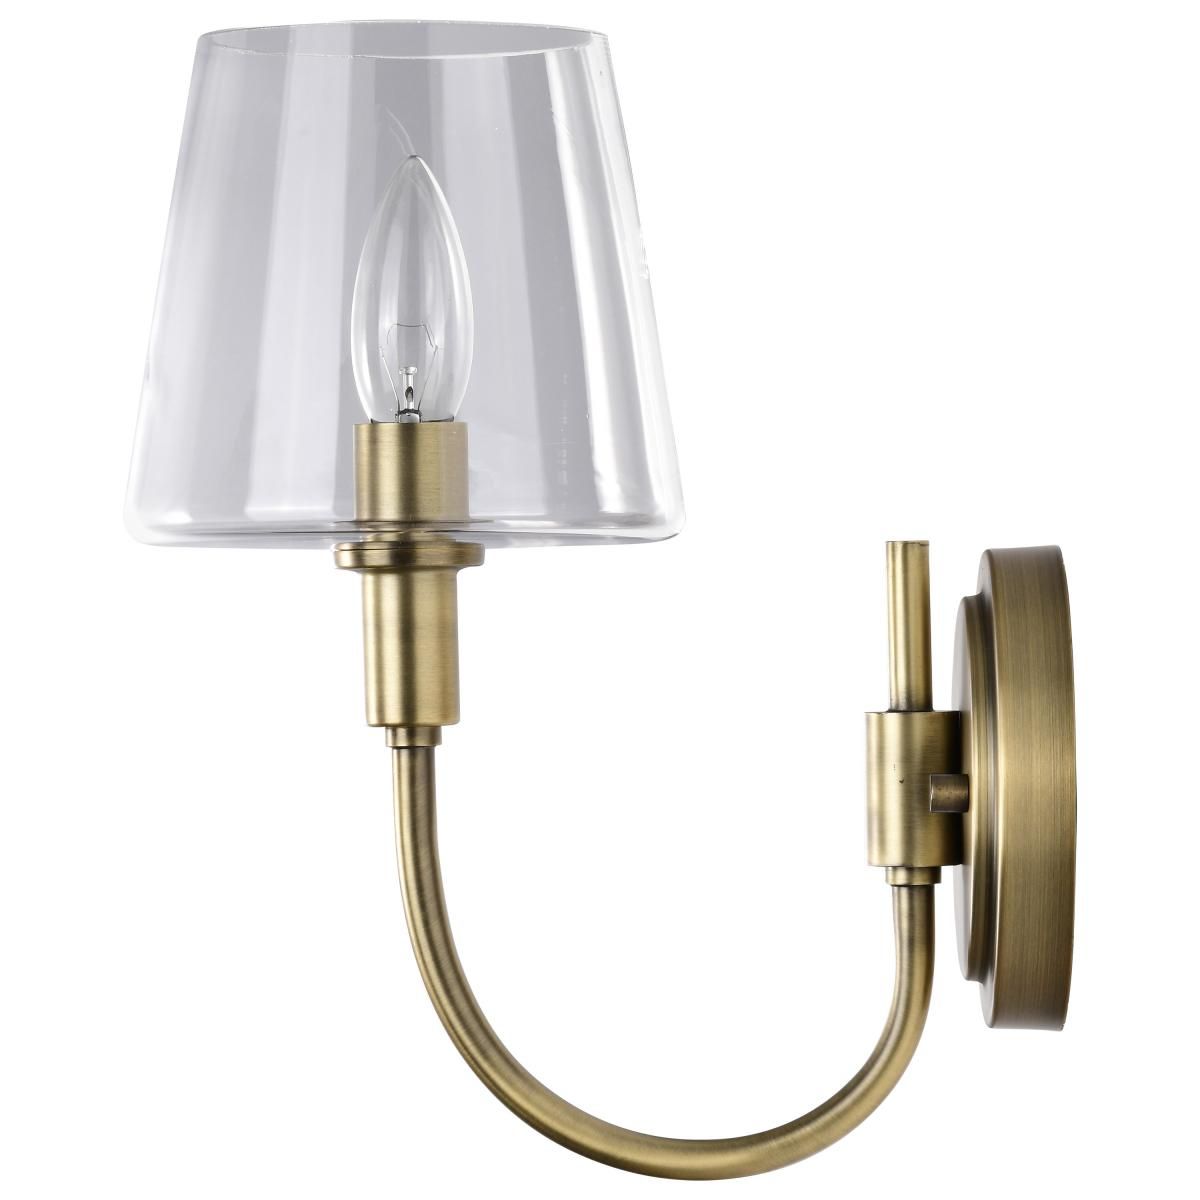 Brookside 12 in. Wall Sconce Vintage Brass Finish